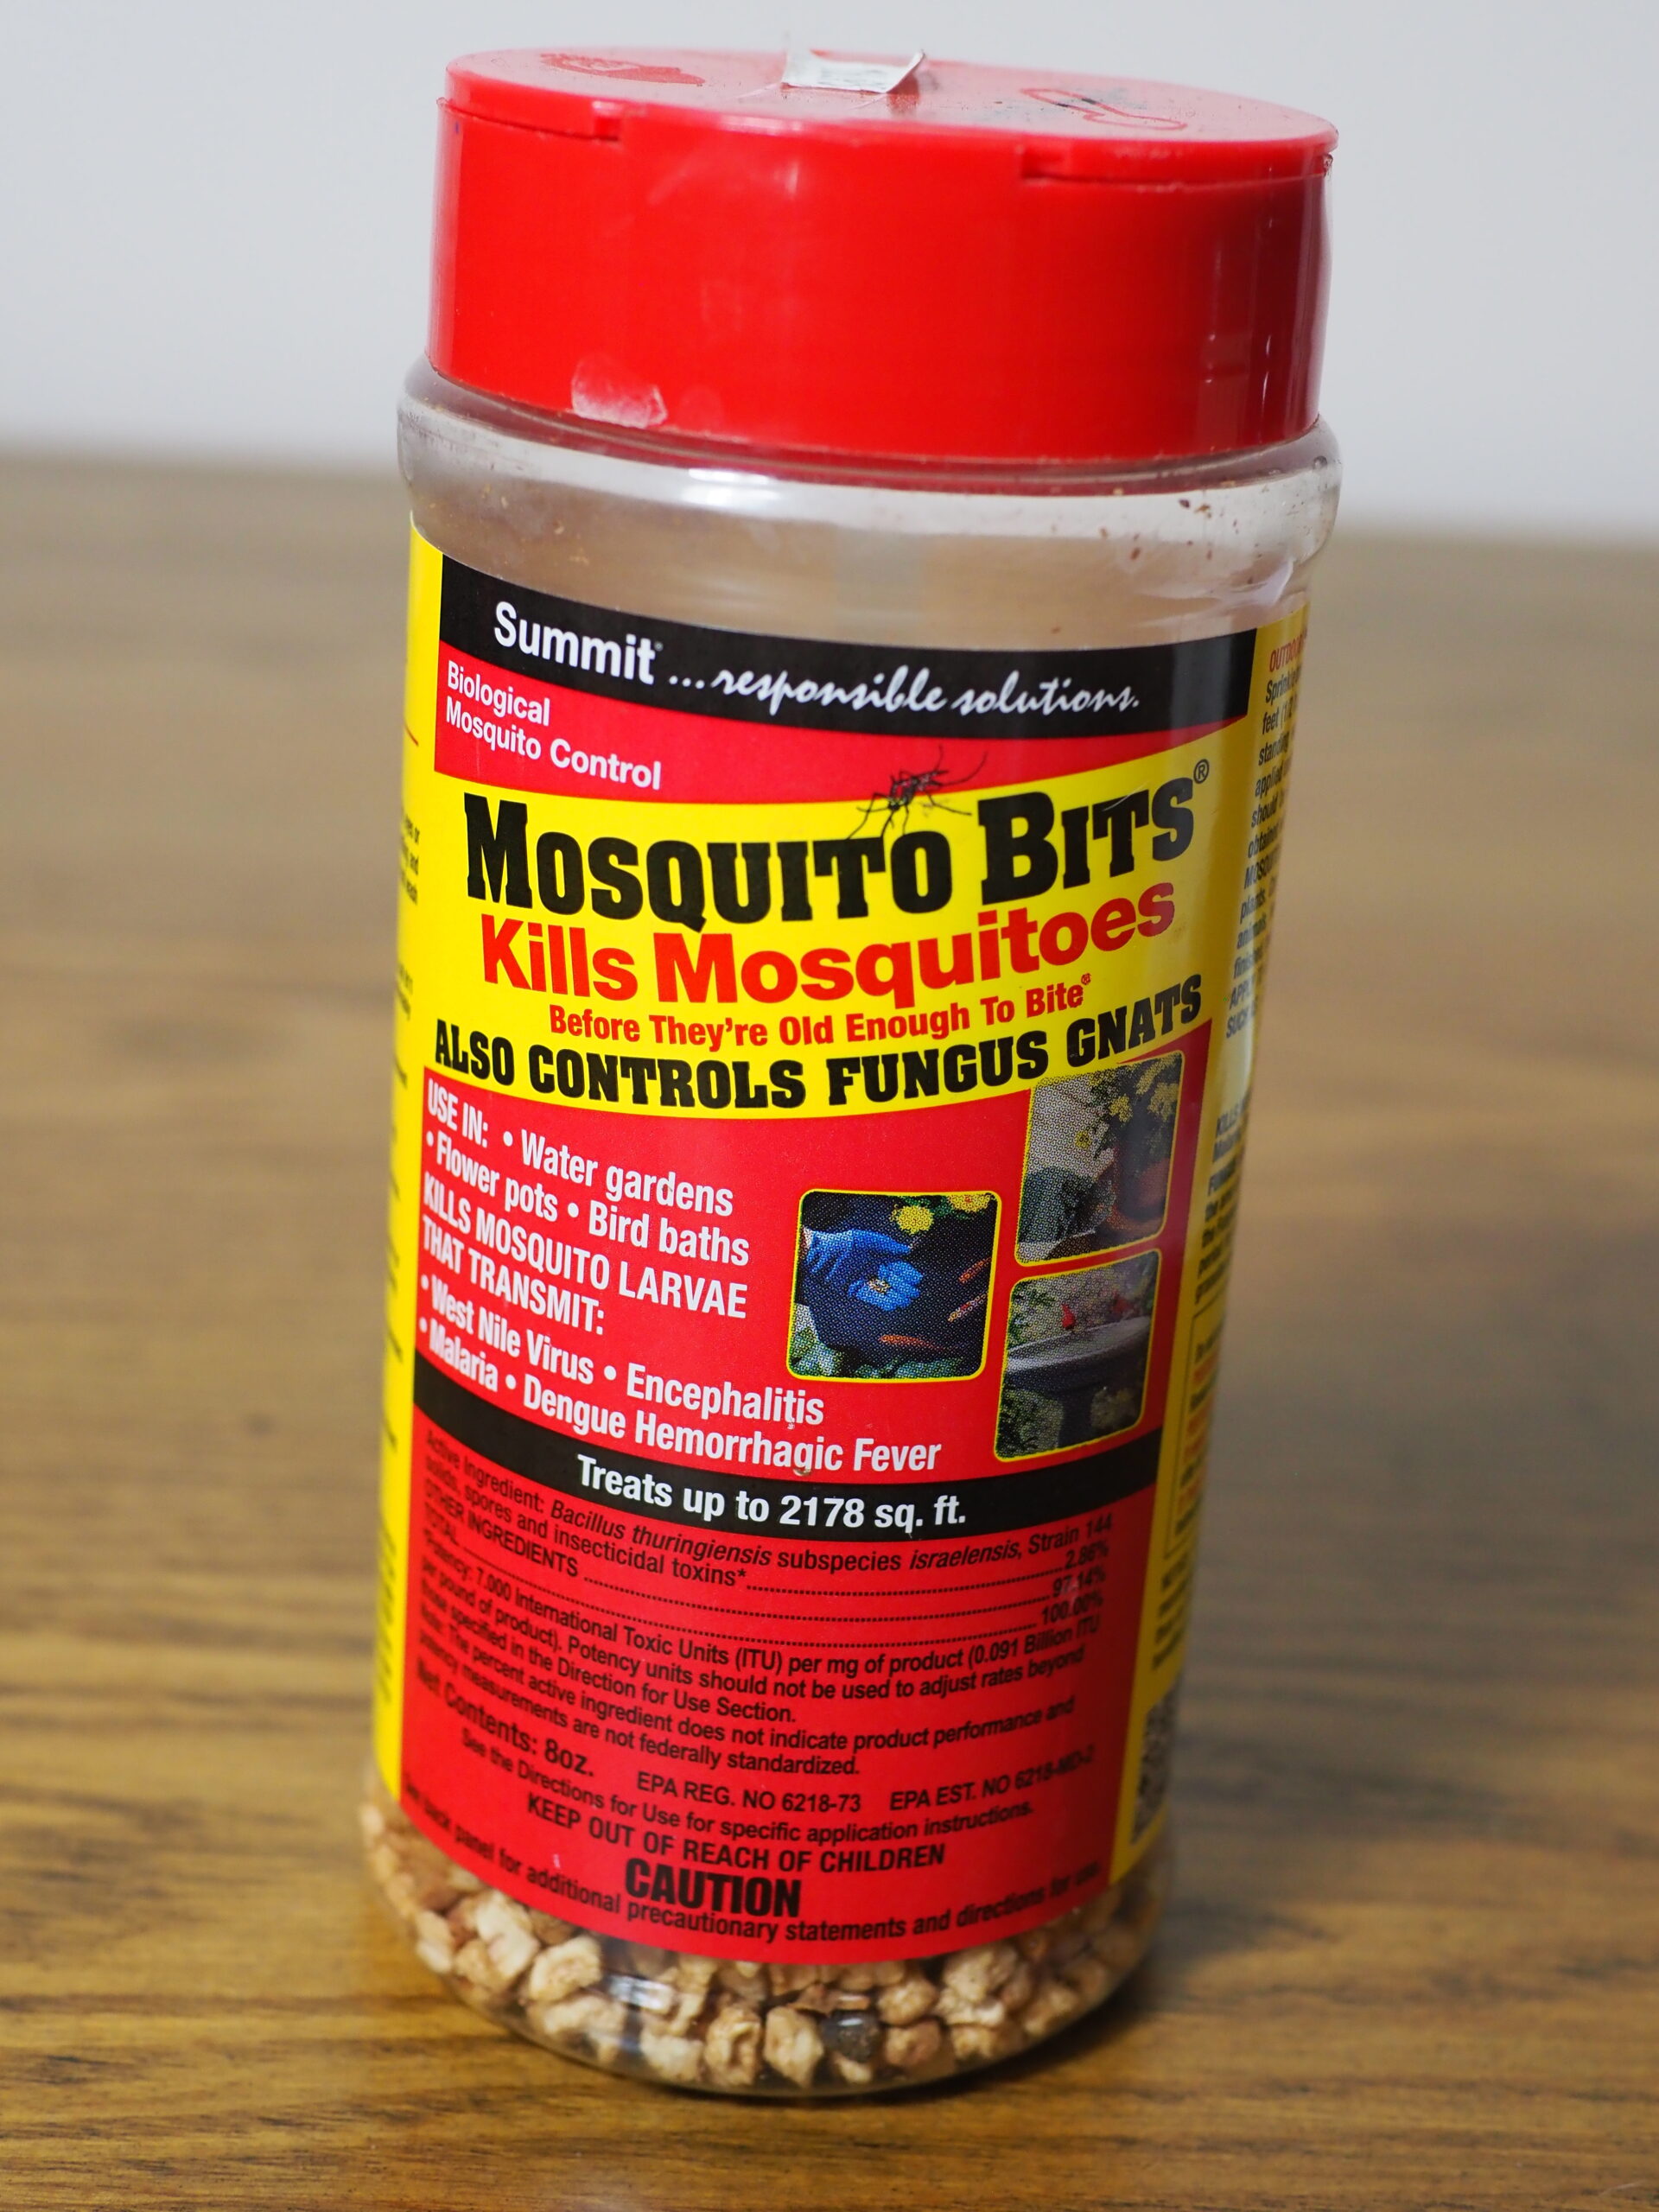 Mosquito Bits are used in bird baths and water gardens to control mosquitoes. When the pellets are mixed and dissolved in water, the bits are used to control fungus gnats in houseplants.